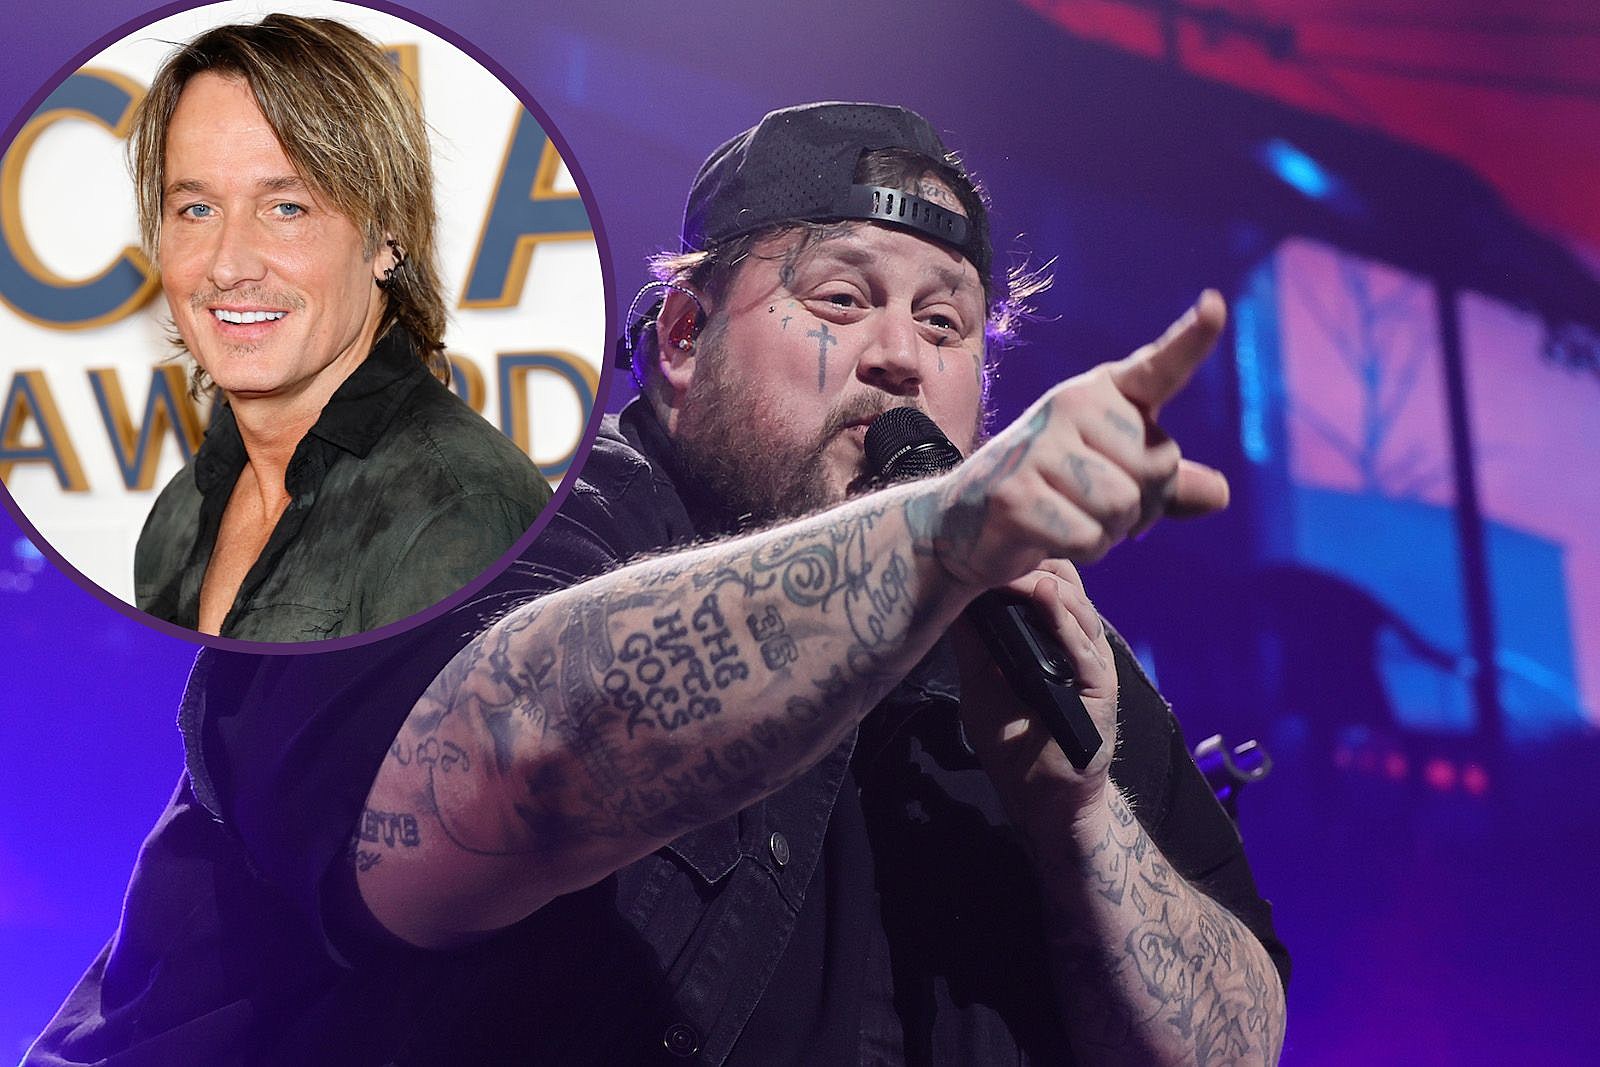 Jelly Roll, Keith Urban + More Will Perform on ‘The Voice’ Season
Finale